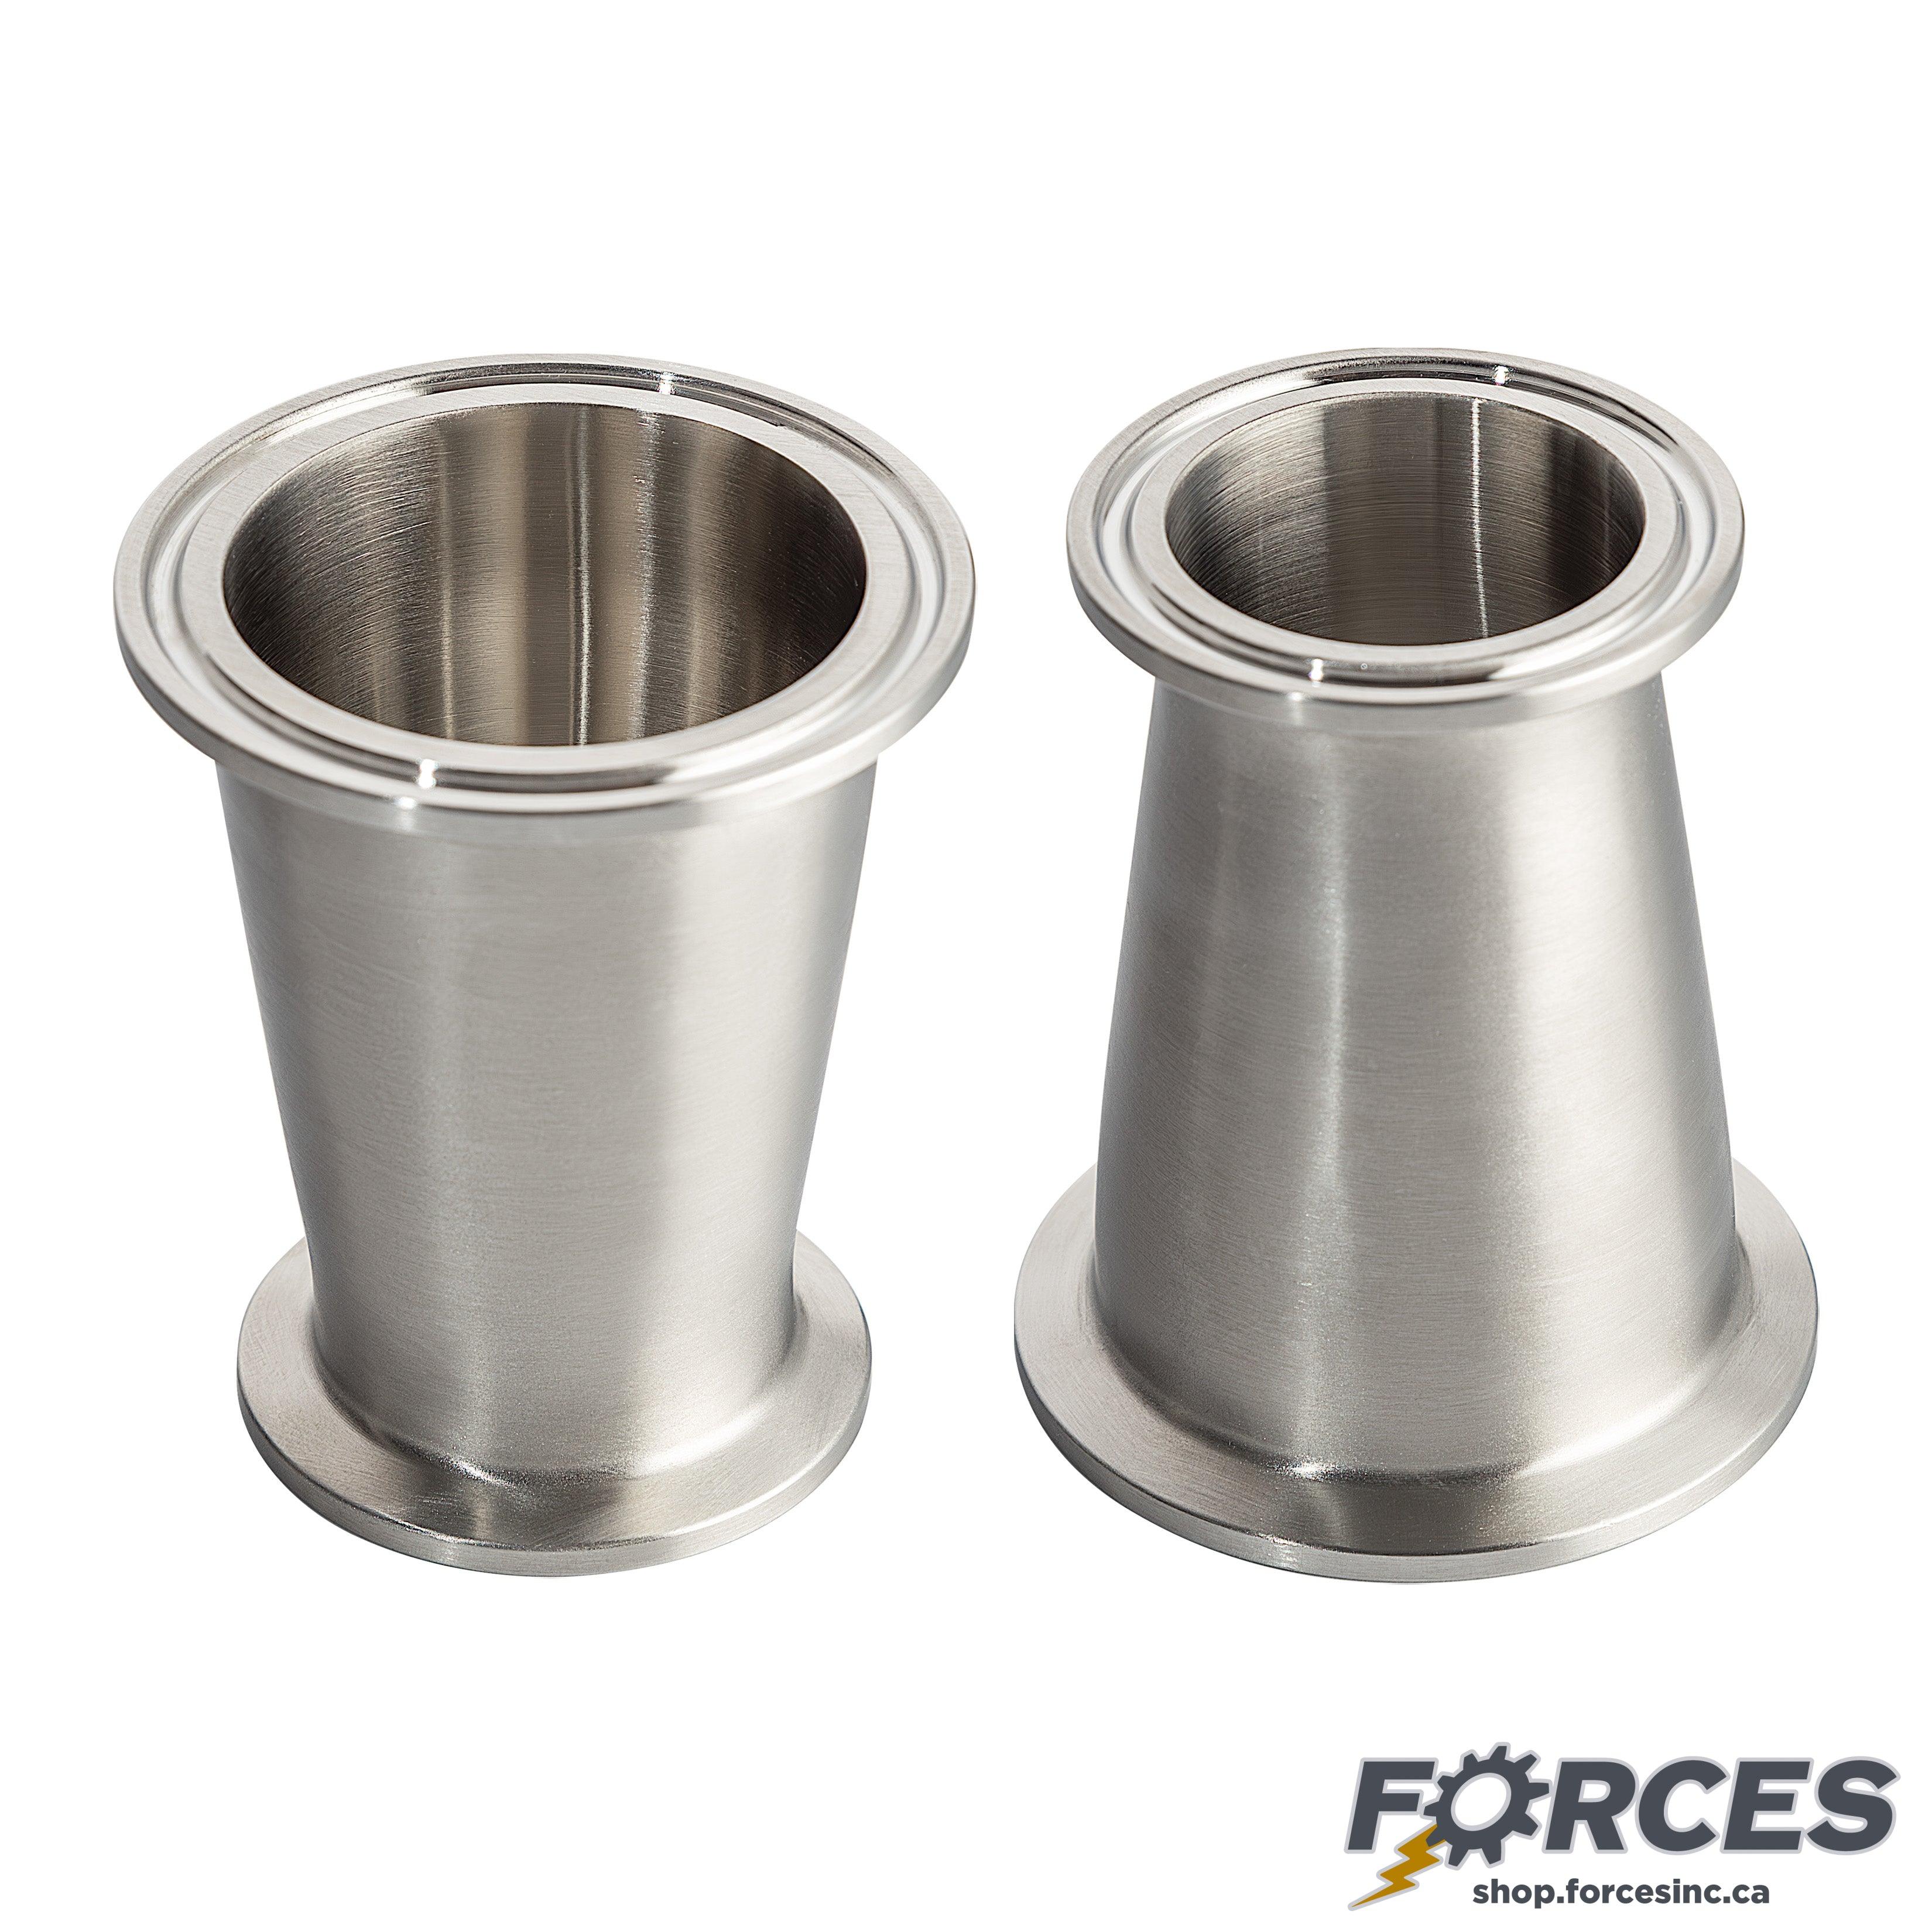 1-1/2" x 1" Tri-Clamp Concentric Reducer - Stainless Steel 304 - Forces Inc